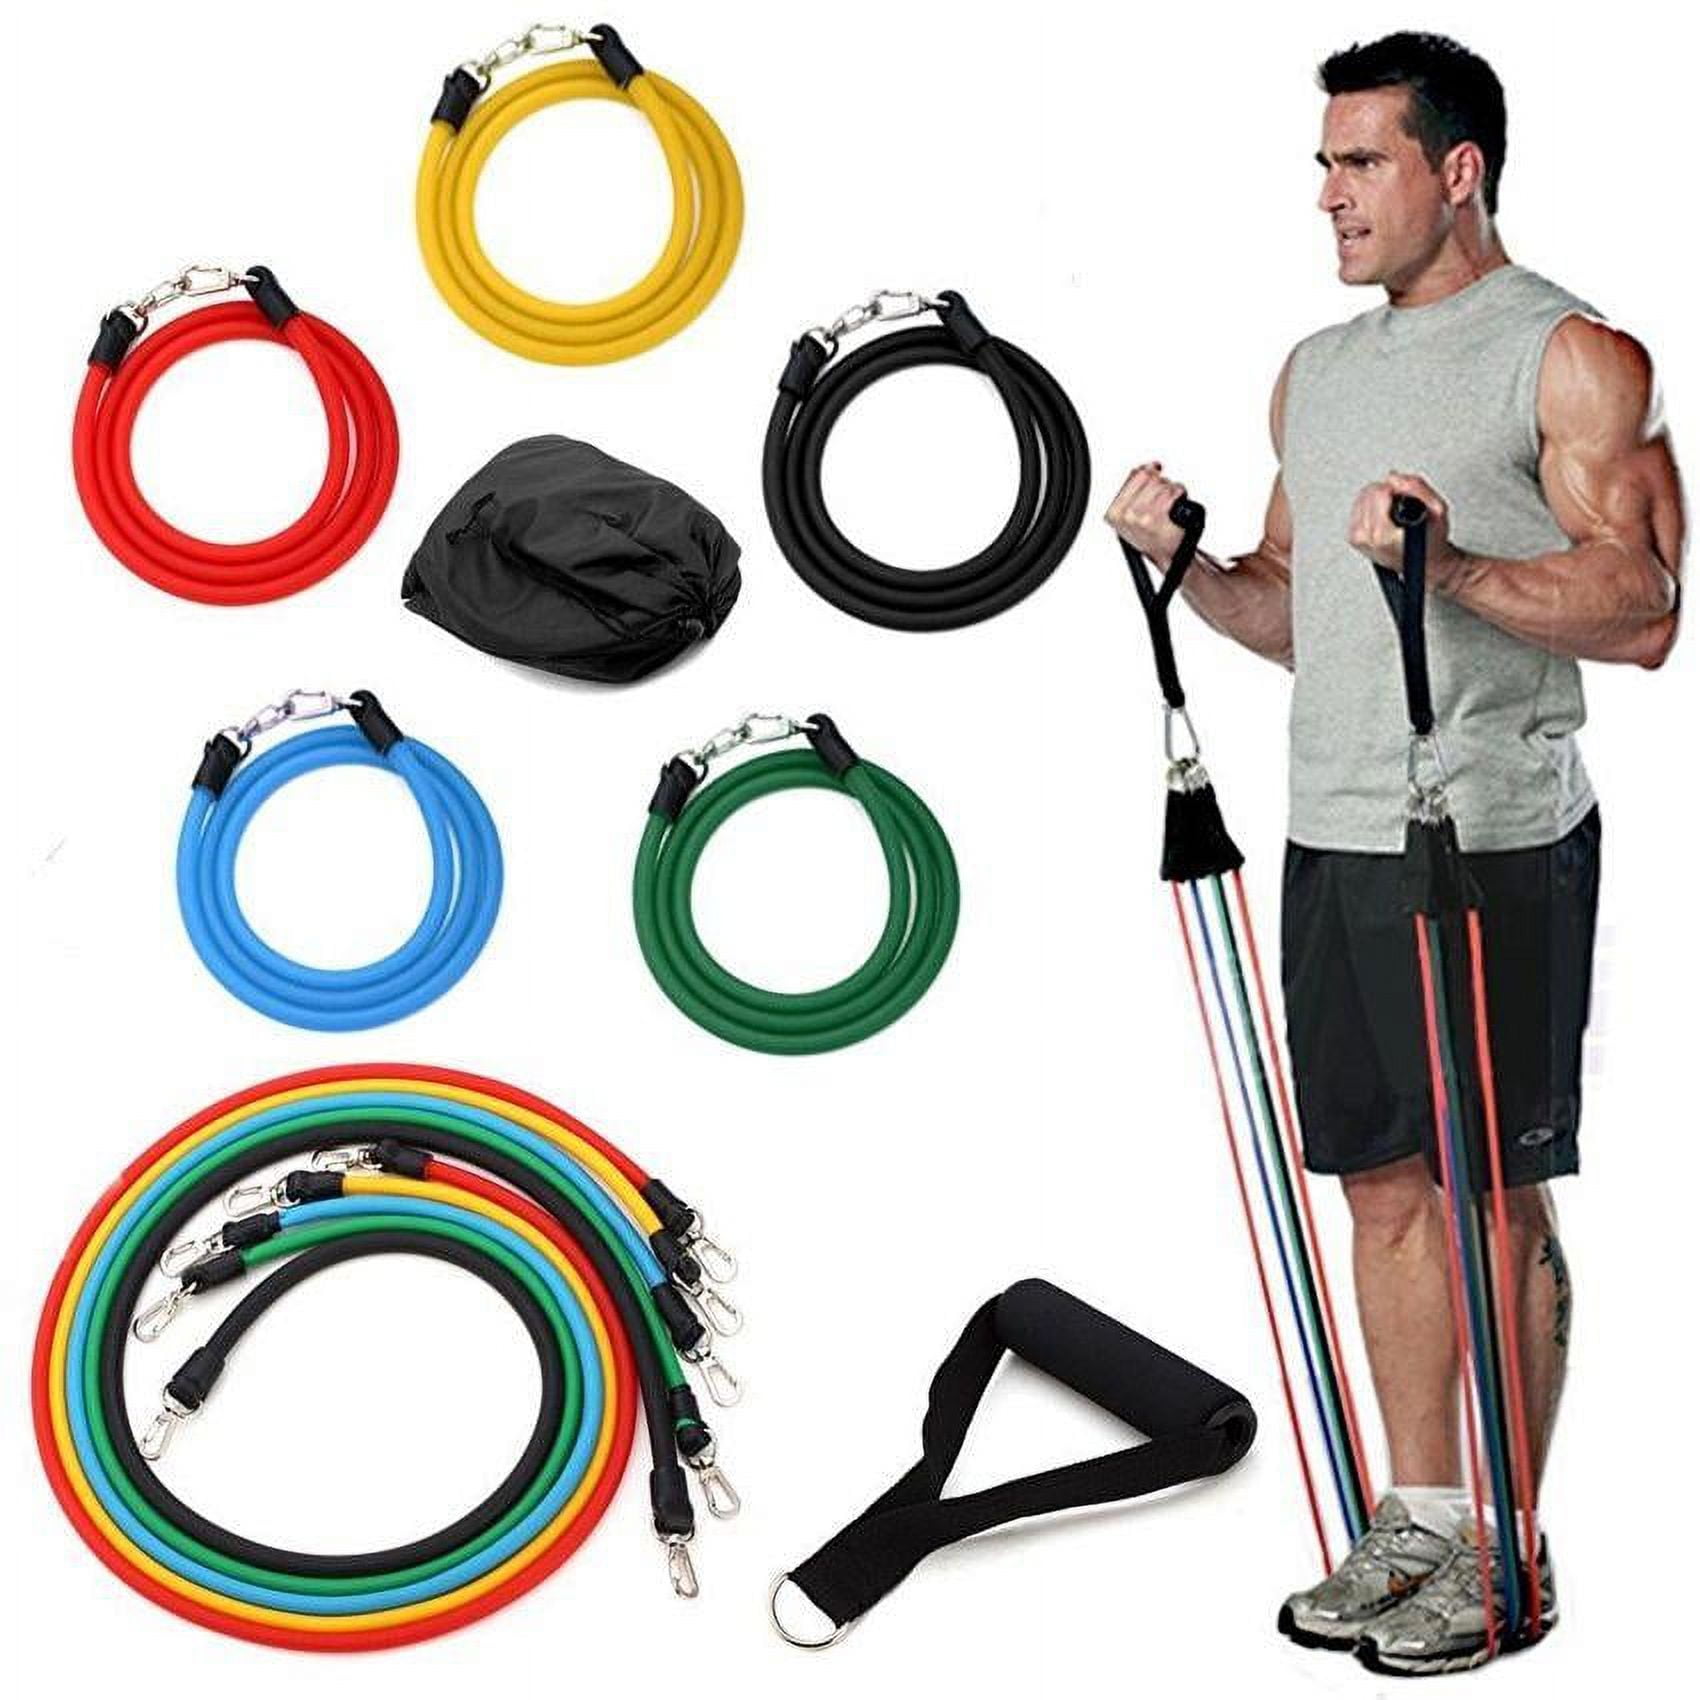 Serenily 11PC Resistance Bands Set - Exercise Bands for Resistance